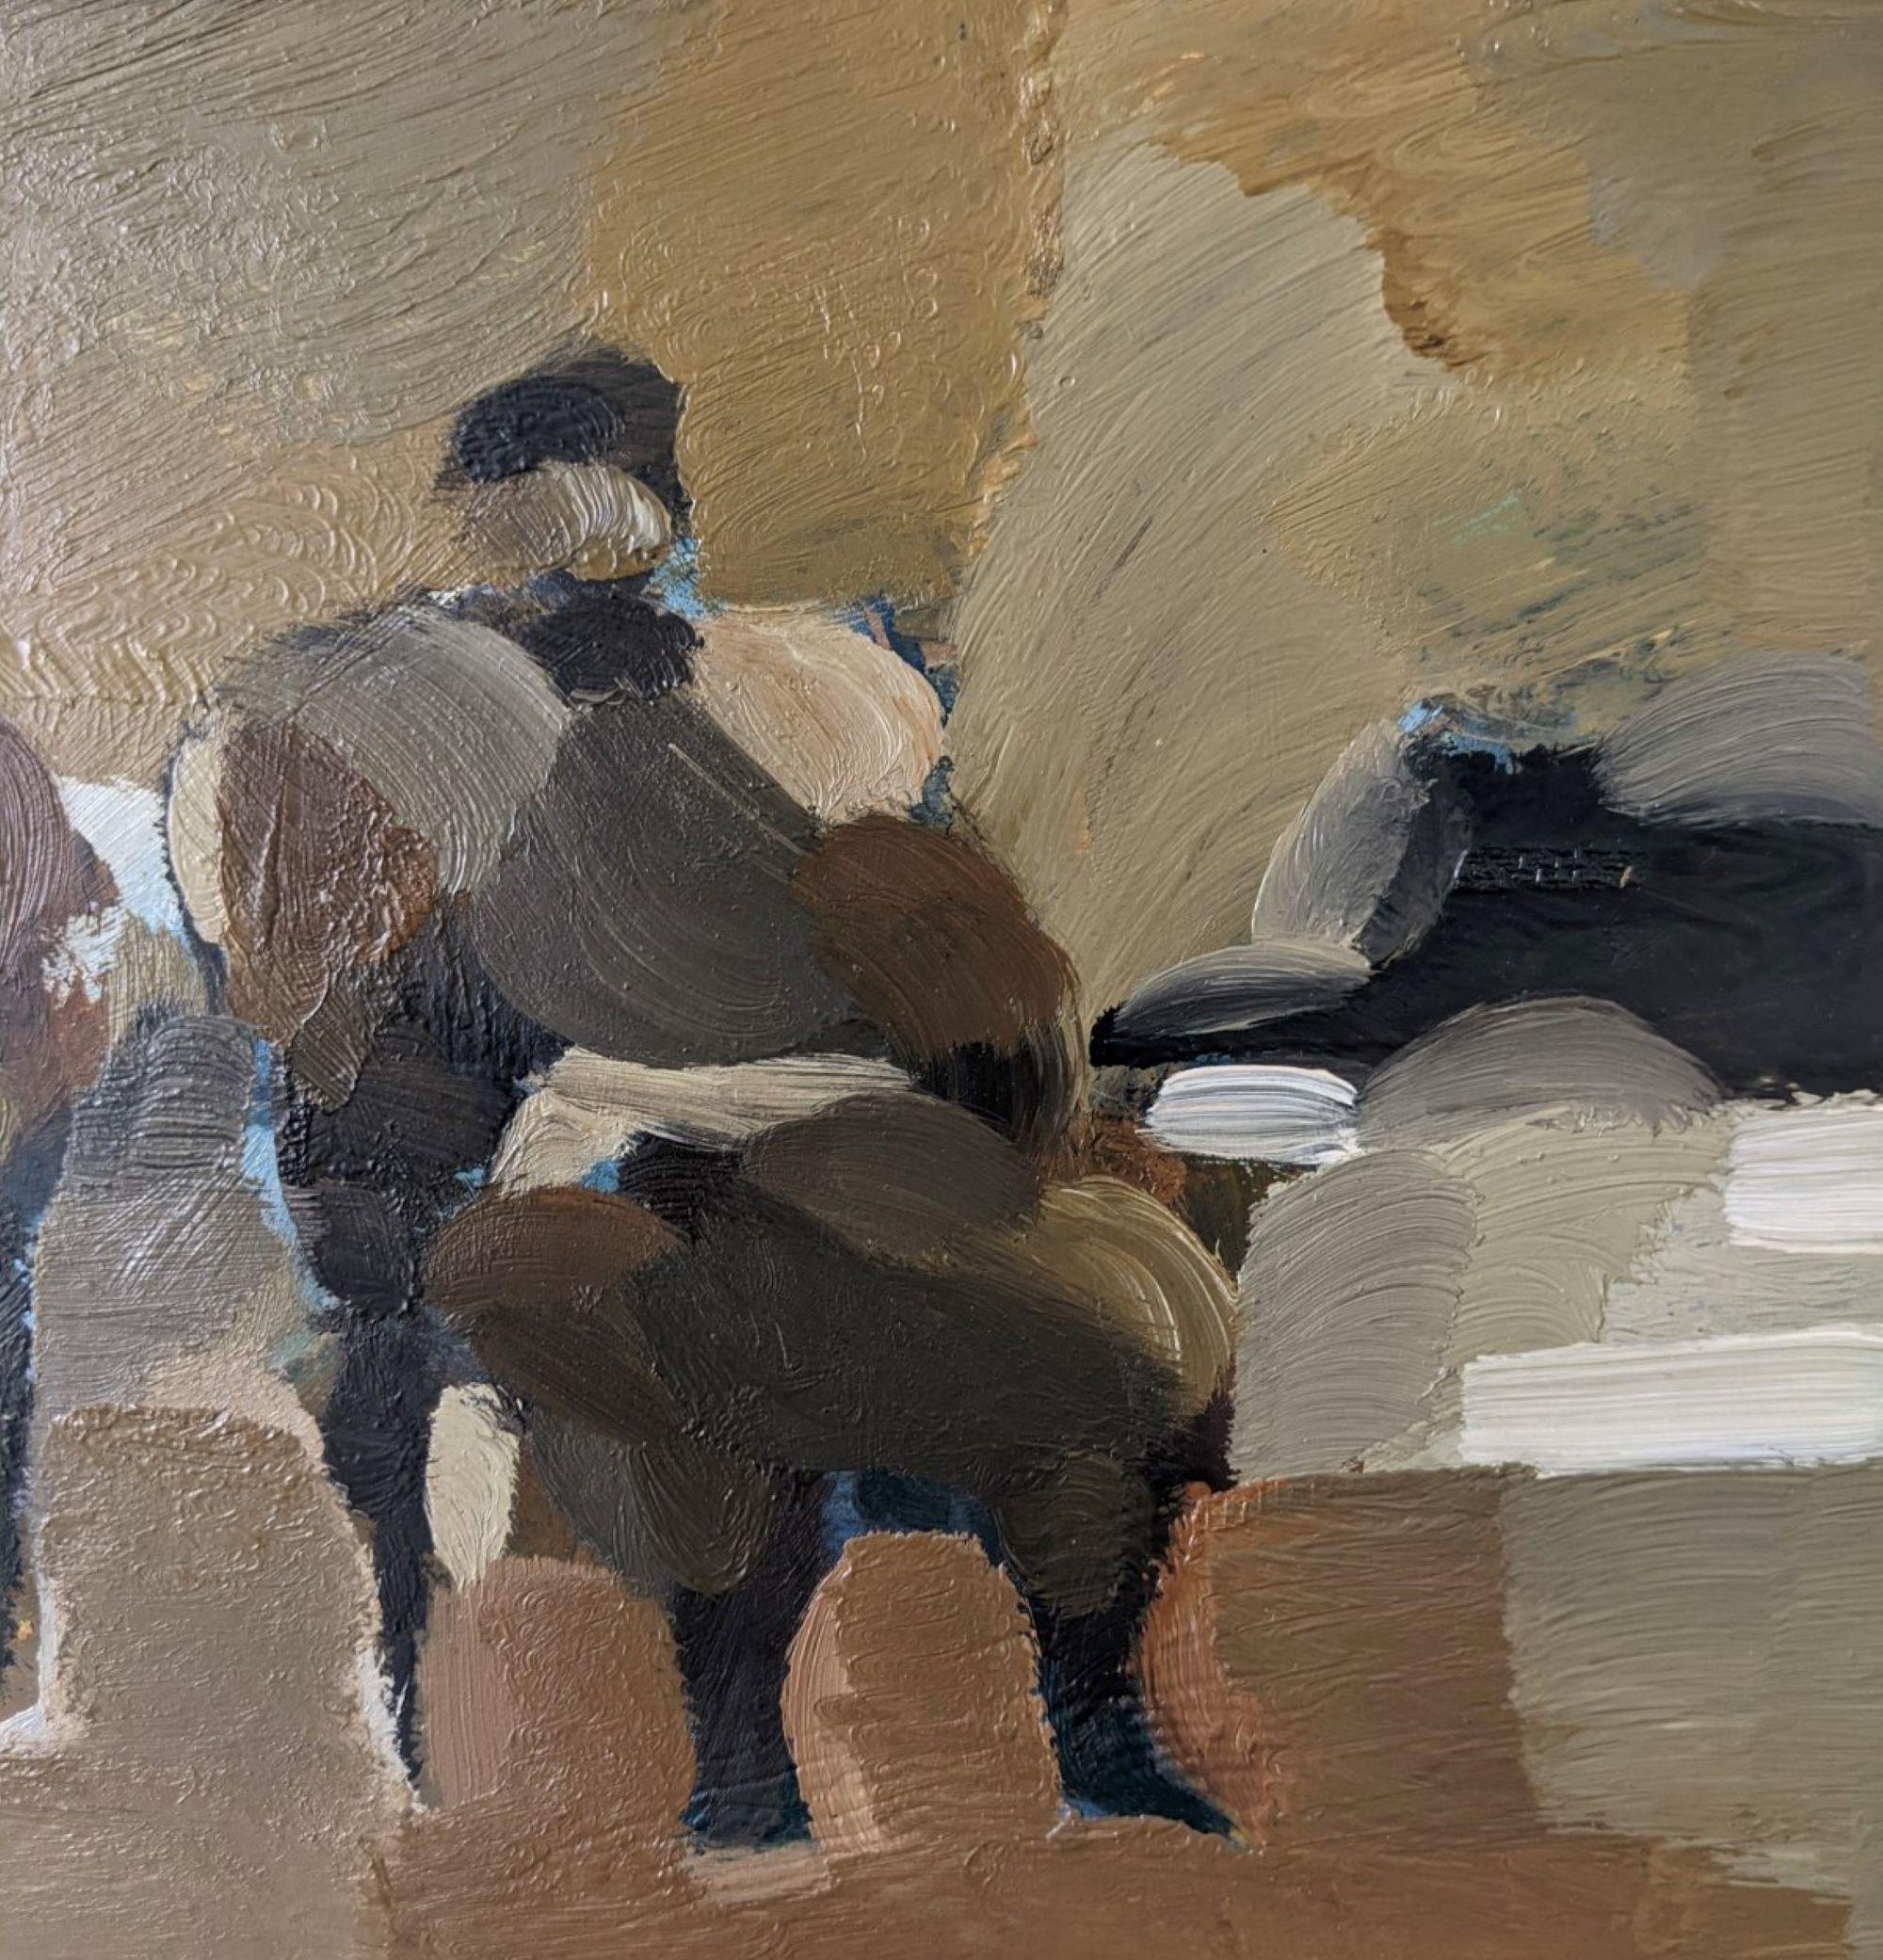 TWO SEATED FIGURES
Size: 26 x 46 cm (including frame)
Oil on panel

An outstanding abstract figurative composition dated 1962 and executed in oil by the well-established Swedish artist Ivar Morsing (1919-2009), whose works have been exhibited in